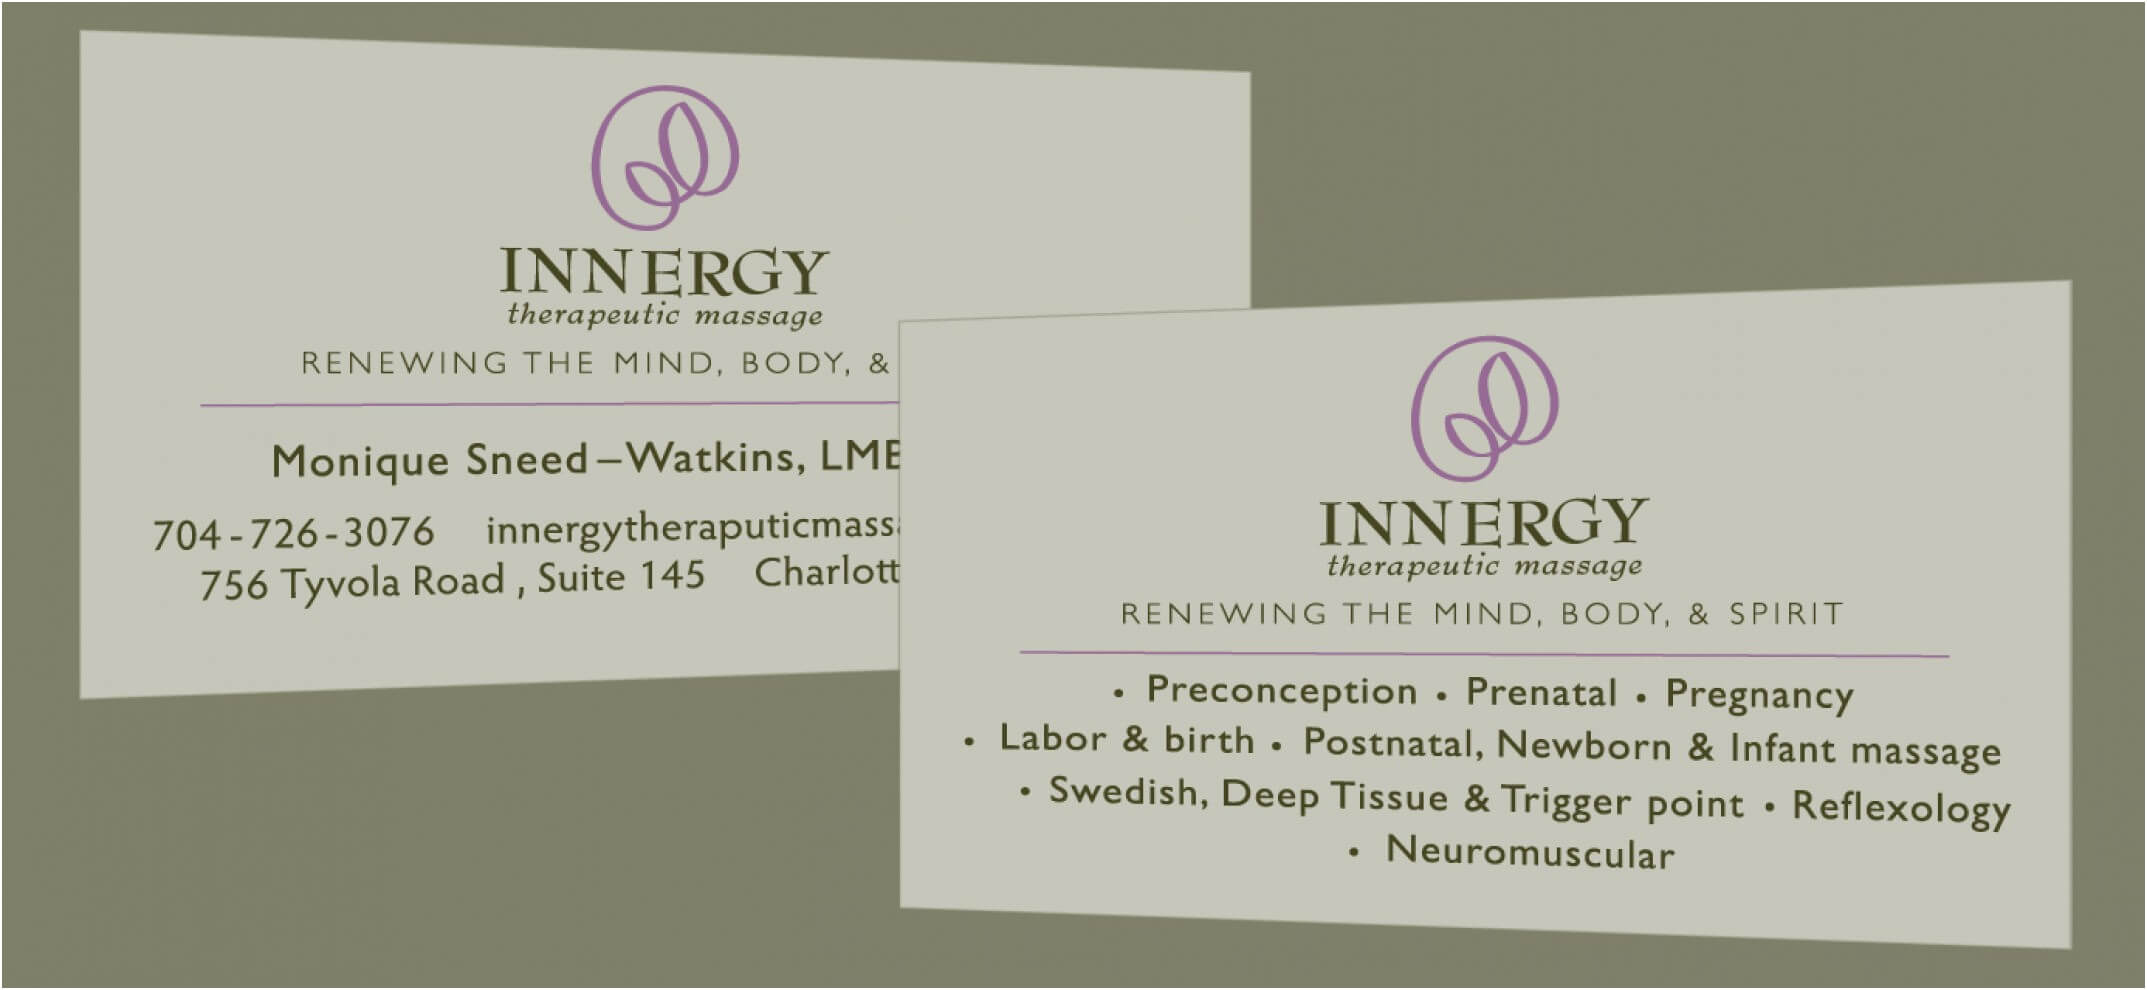 Massage Therapy Business Card Templates Free Therapist Inside Massage Therapy Business Card Templates